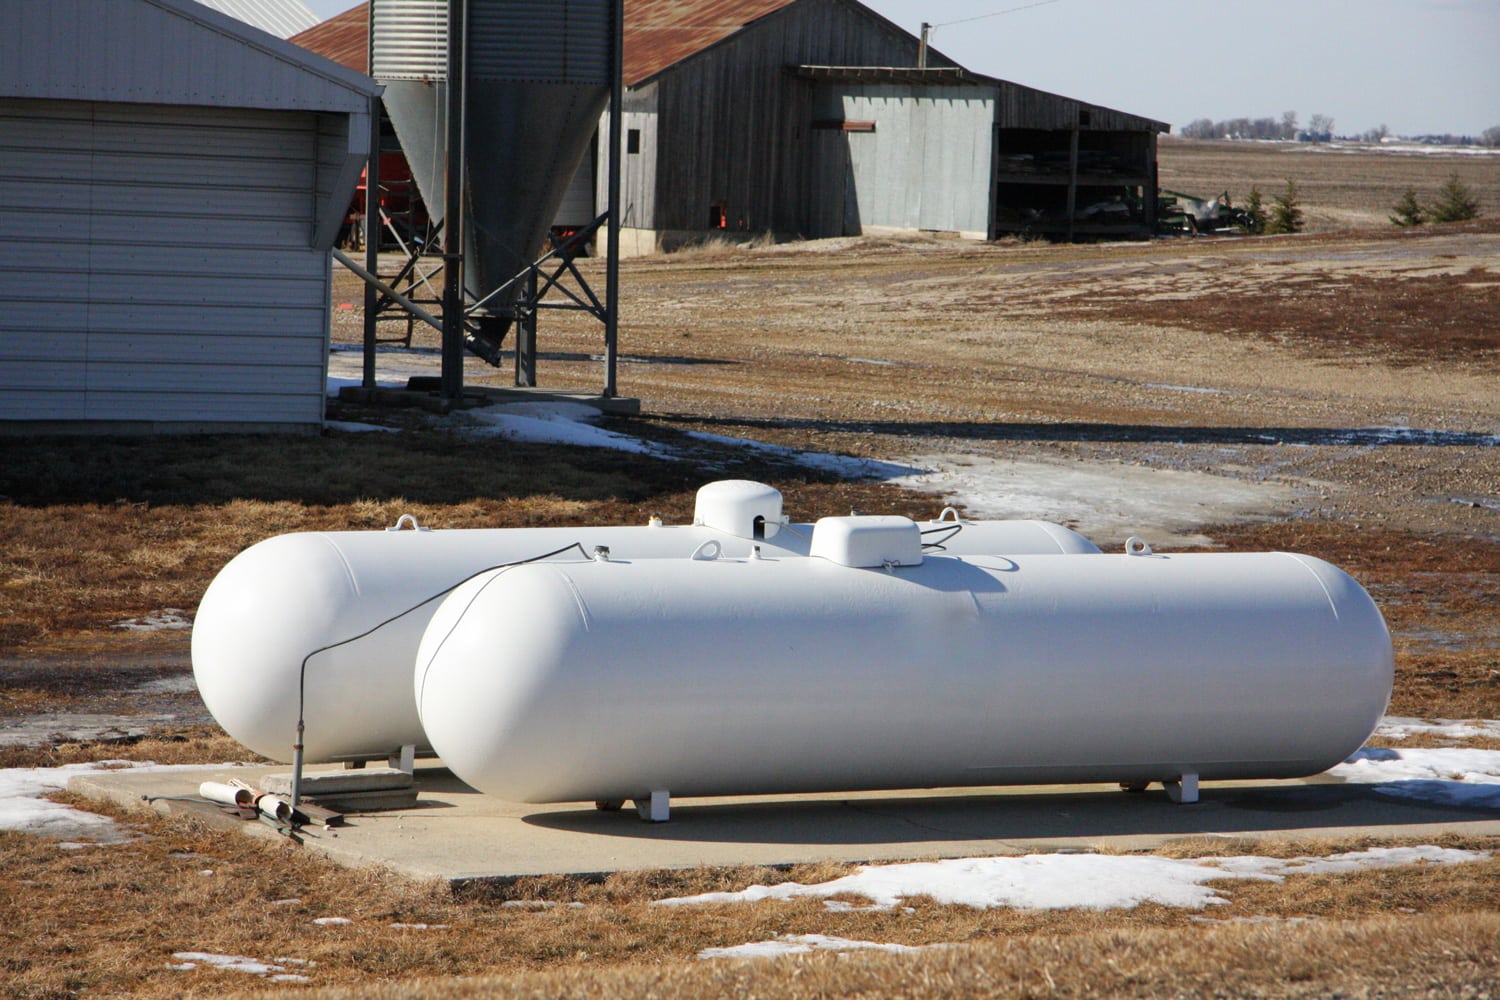 These humble propane tanks play a key role on Iowa farms, where they help heat livestock barns and provide energy for appliances in farm homes.